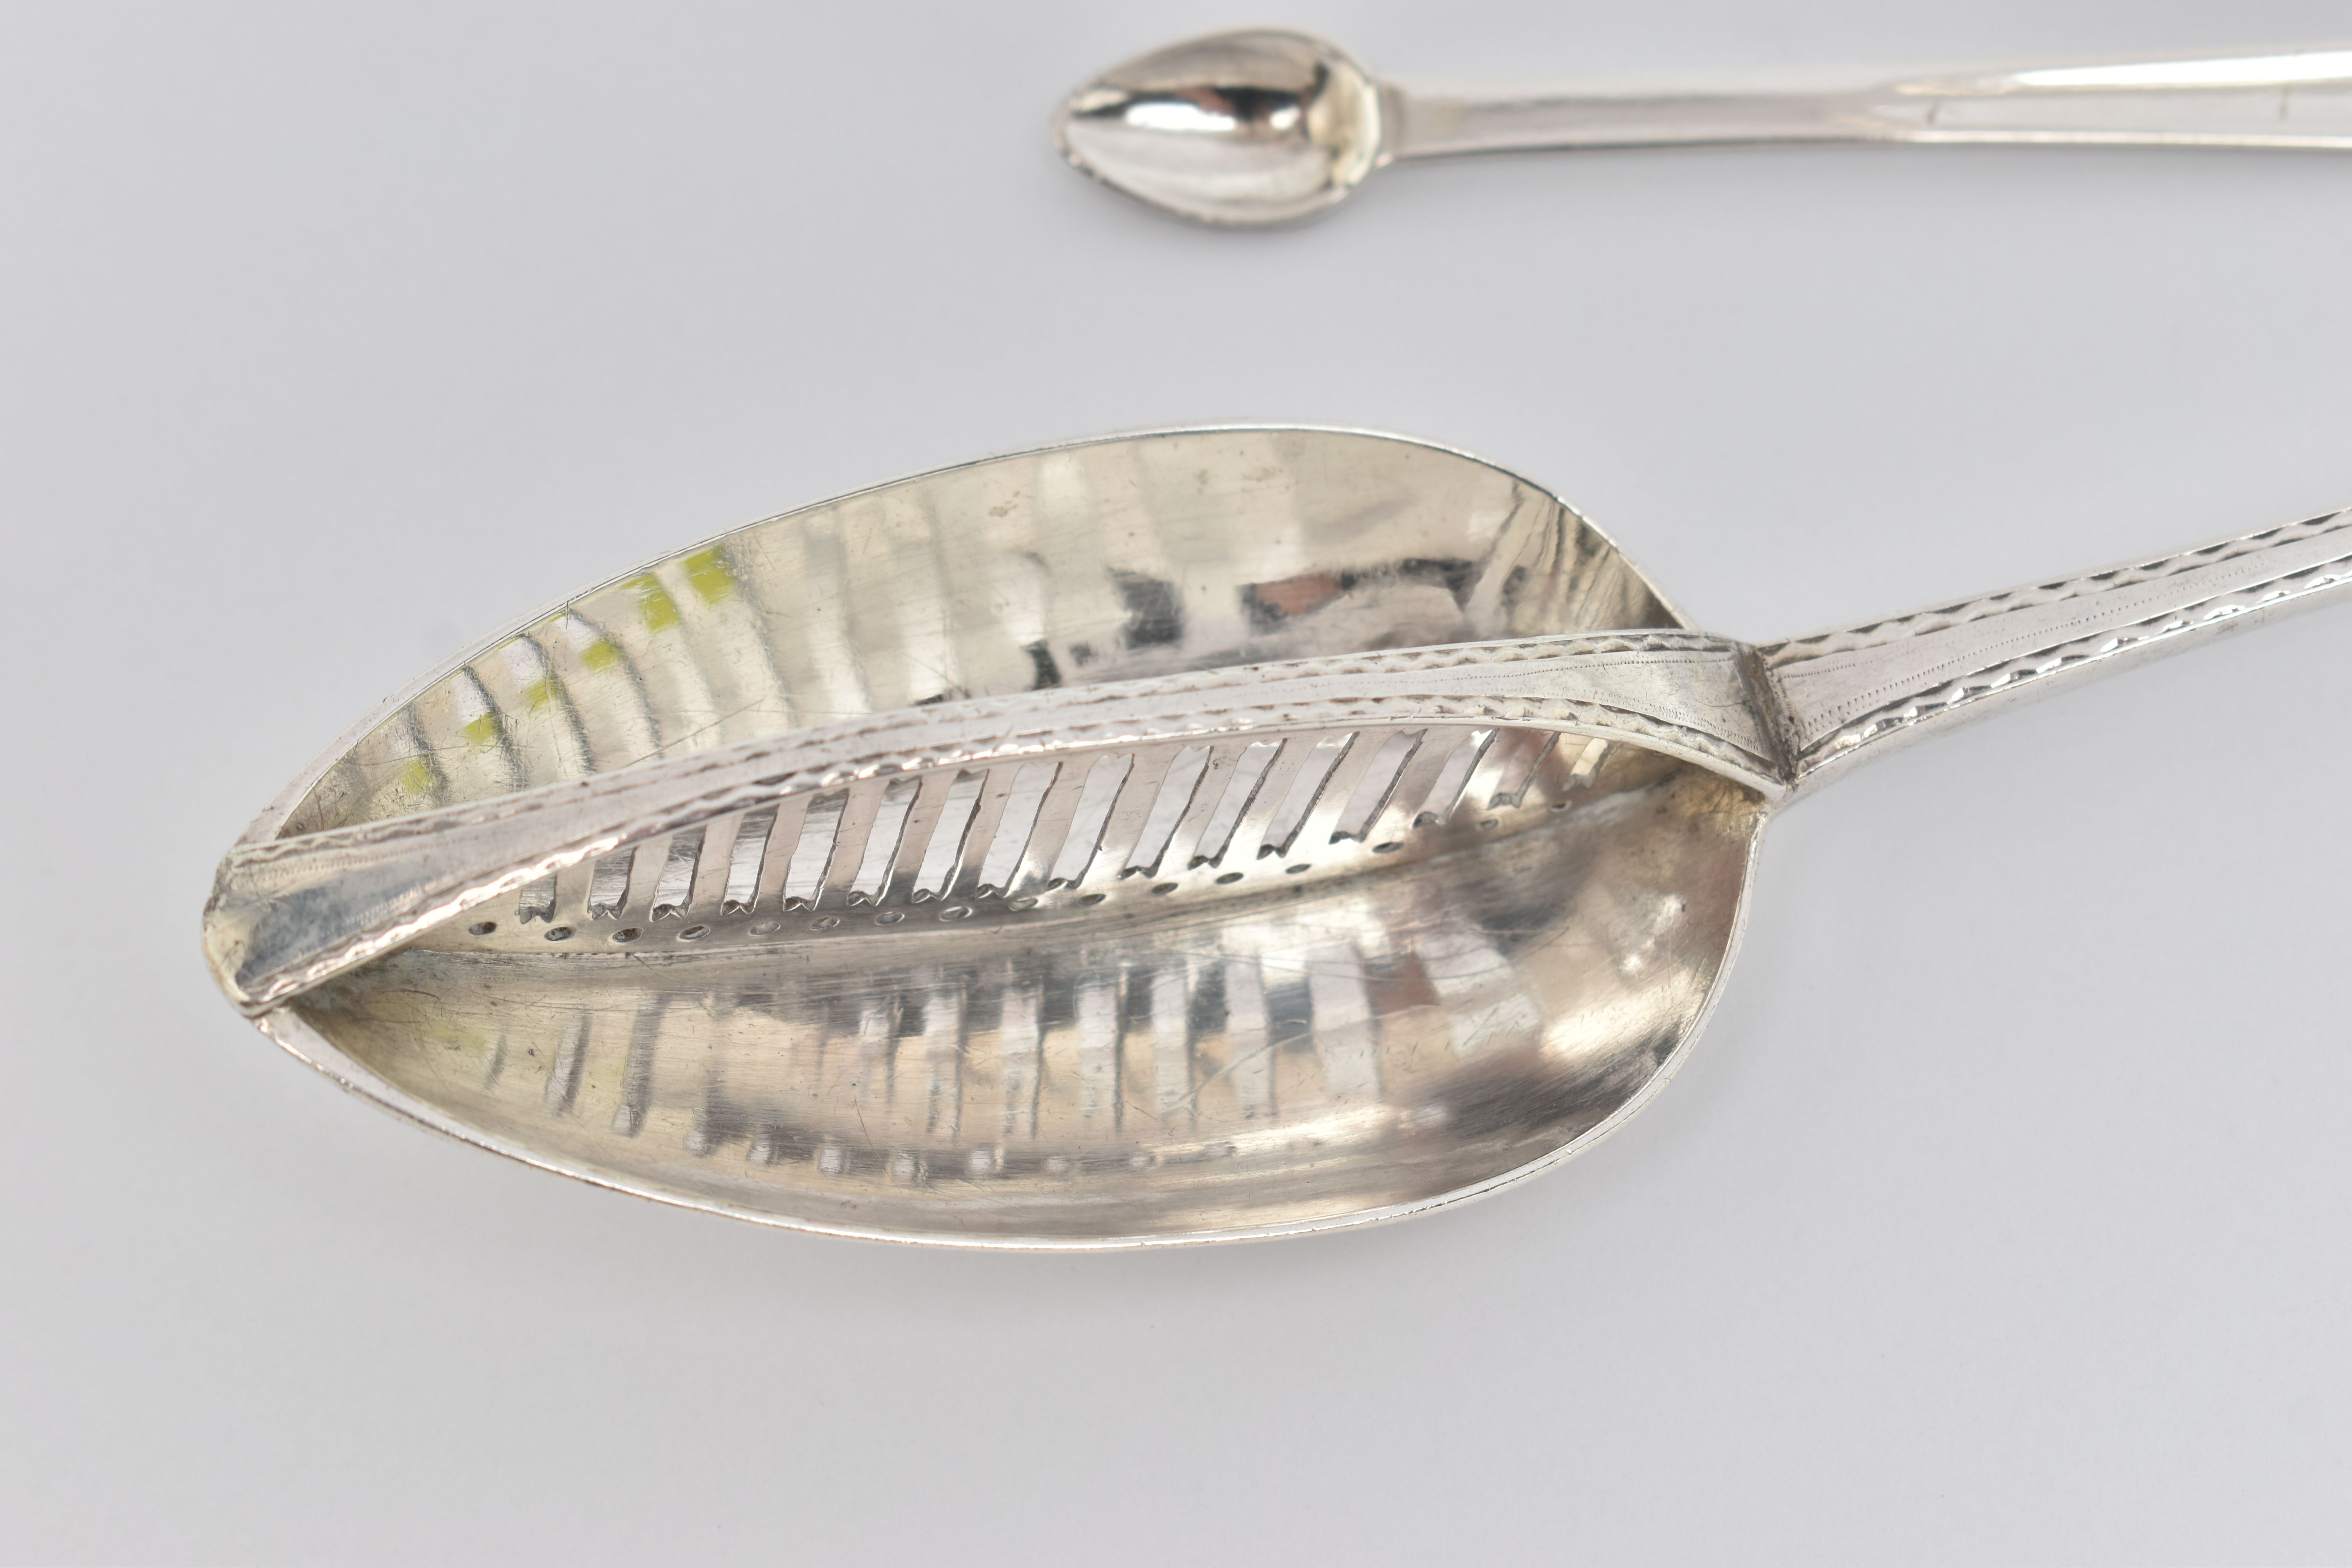 A LATE 18TH CENTURY IRISH SILVER GRAVY STRAINING SPOON AND A PAIR OF SUGAR TONGS WITH MATCHING - Image 2 of 6